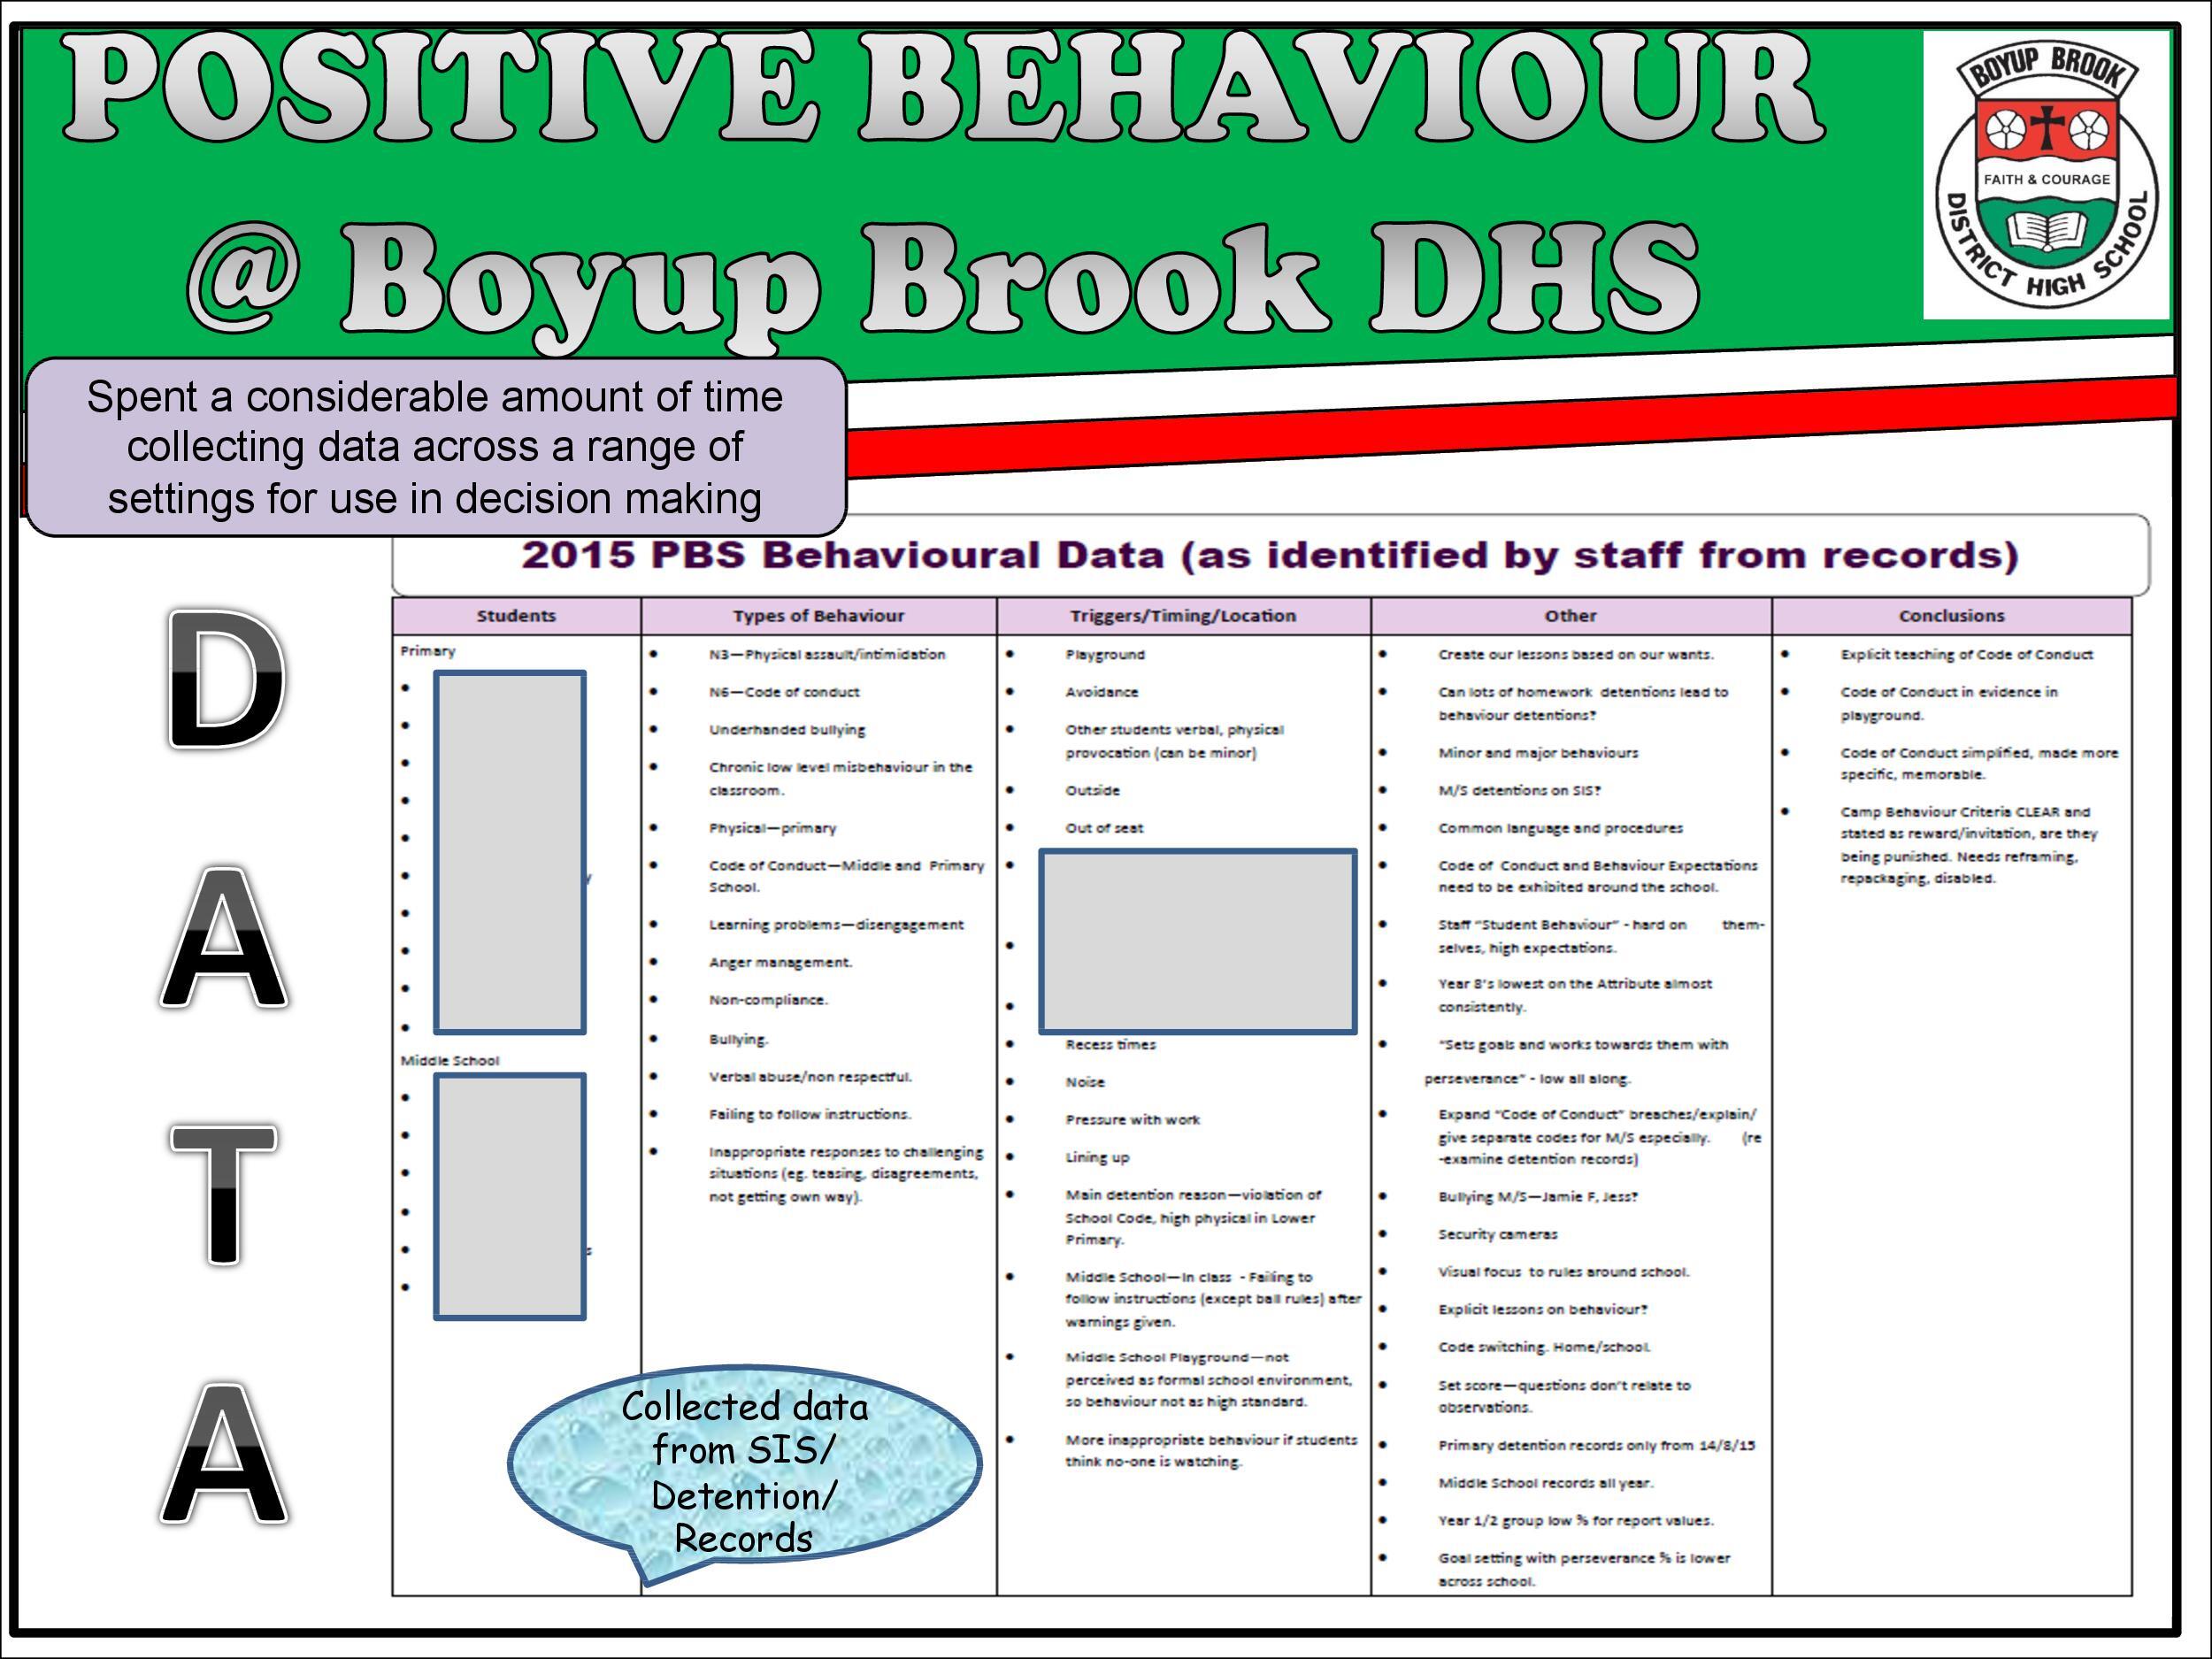 Positive Behaviour Support Page 7